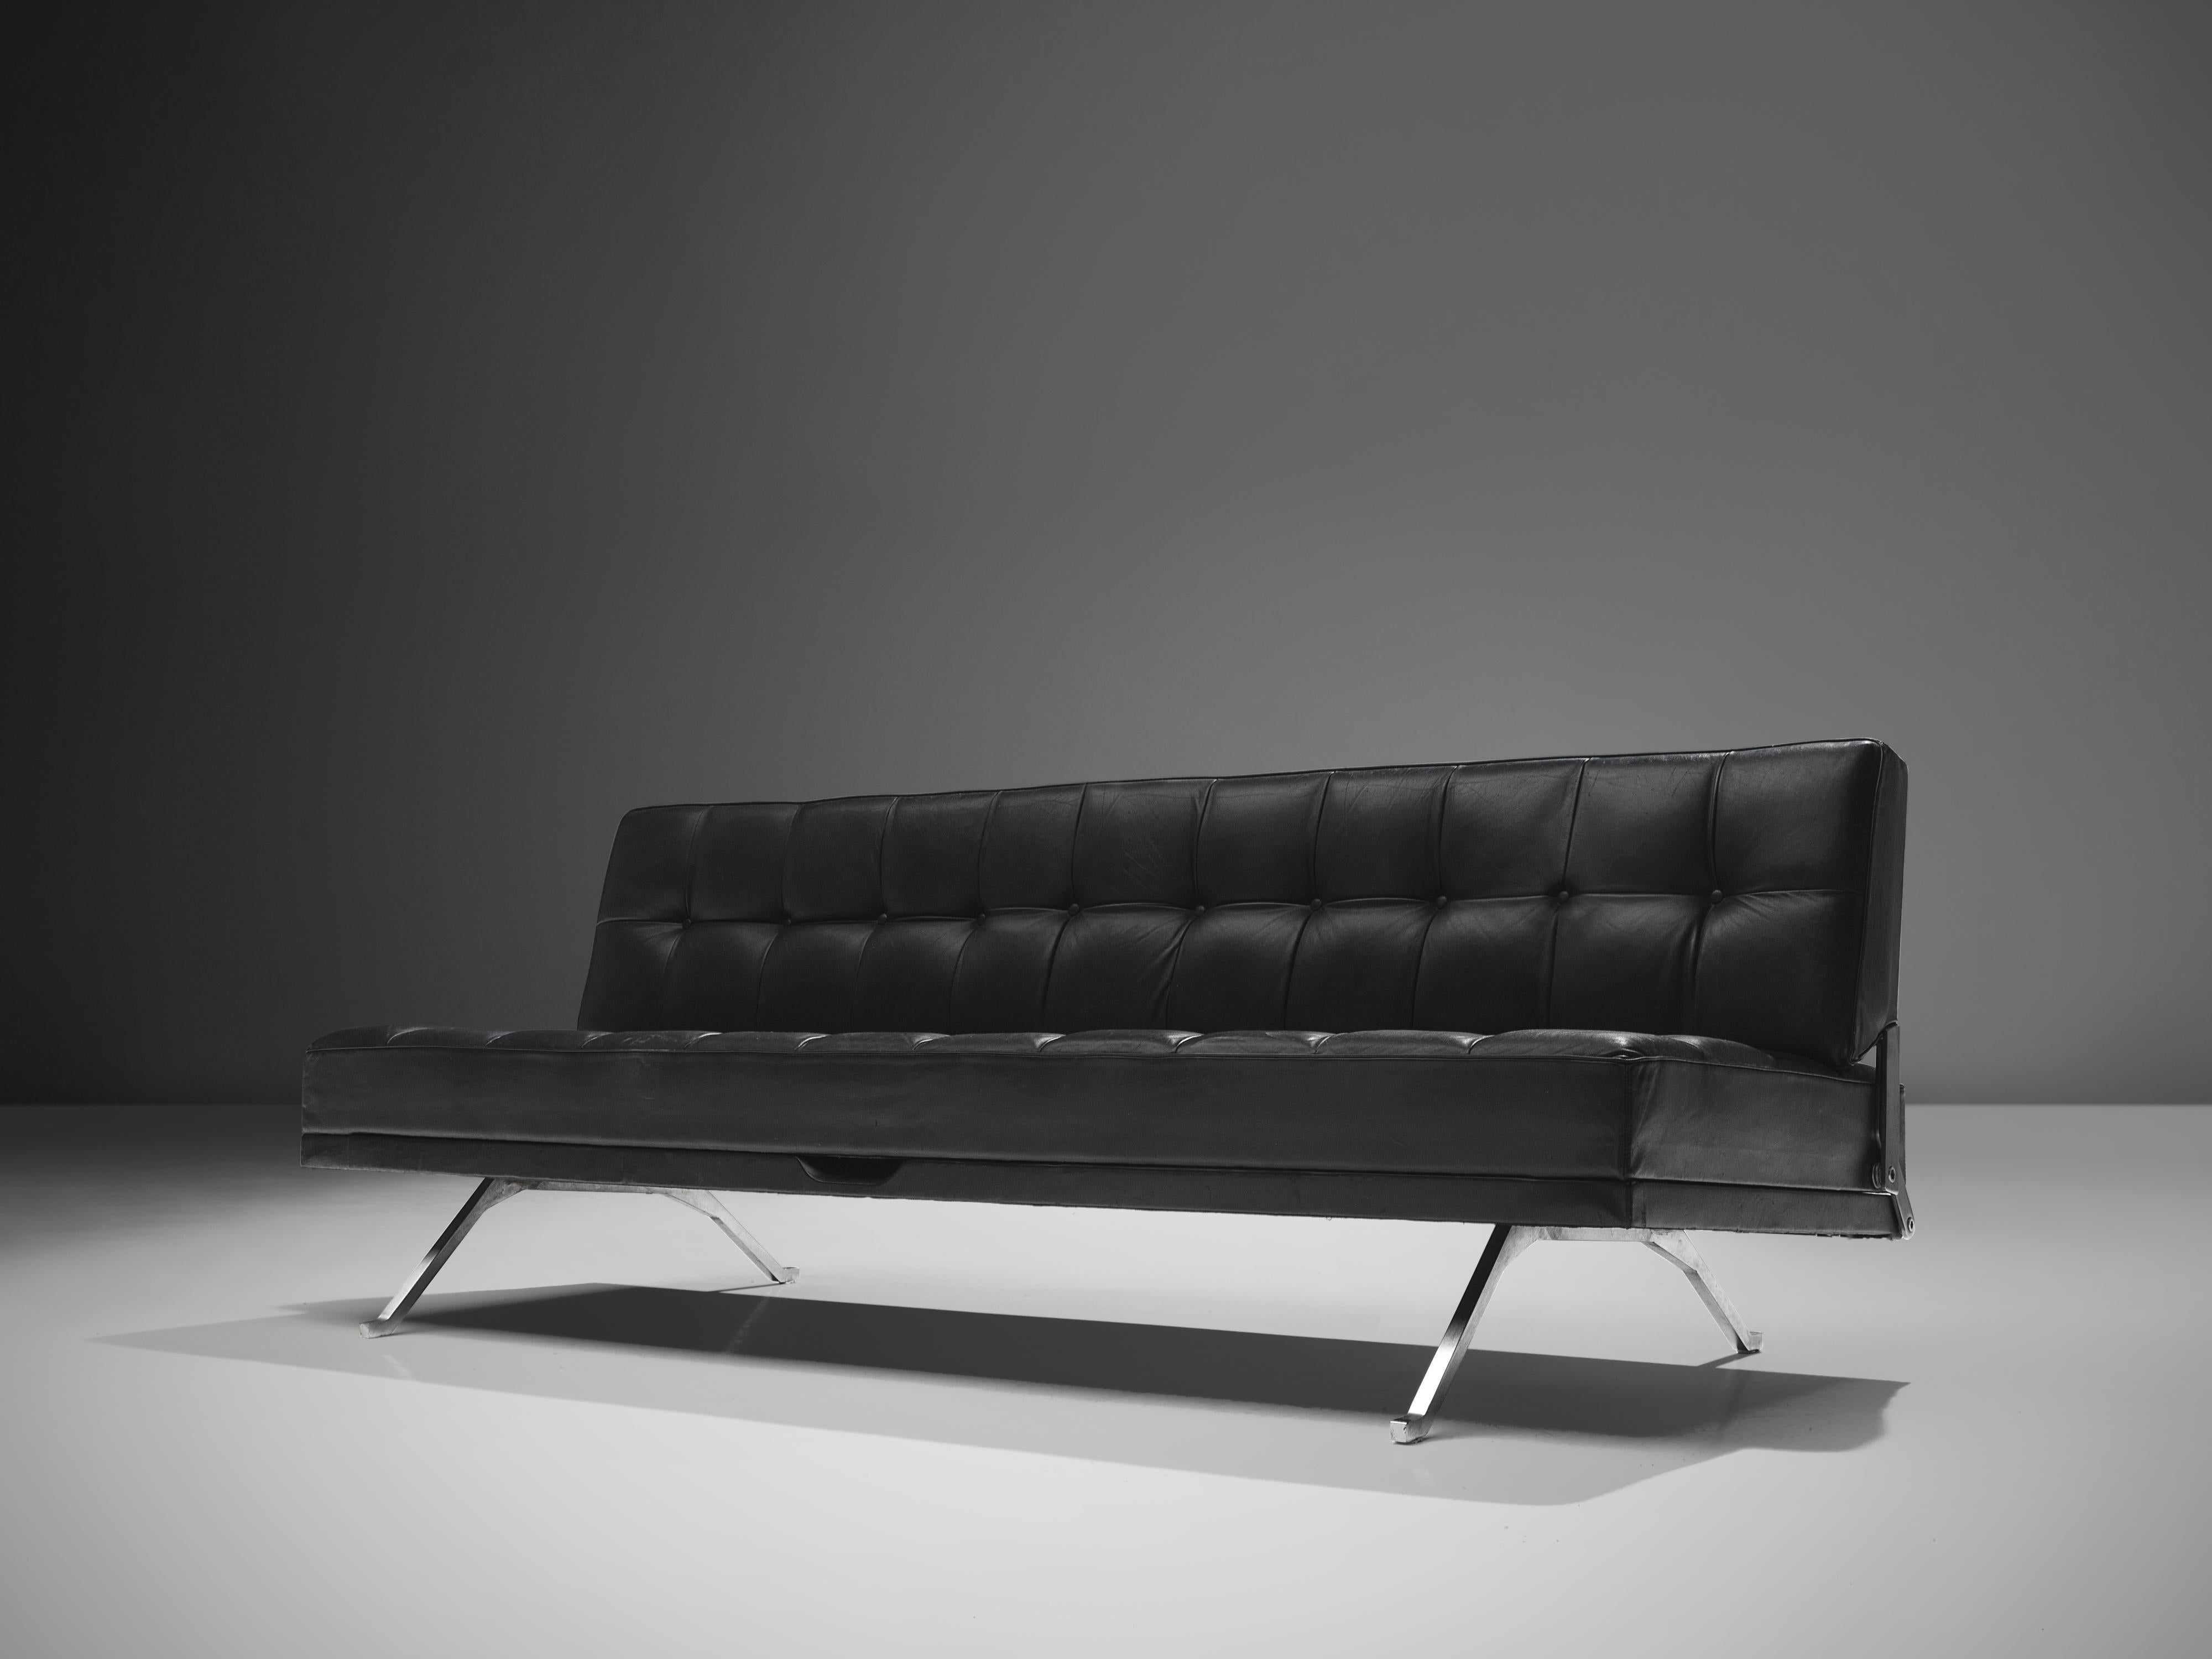 Johannes Spalt for Wittmann, 'Constanze' daybed or sofa, black leather, steel, Austria, 1960s. 

This Austrian daybed named is typical for Mid-Century Modern design from Austria. The tufted leather seat and back is constructed with the slick and